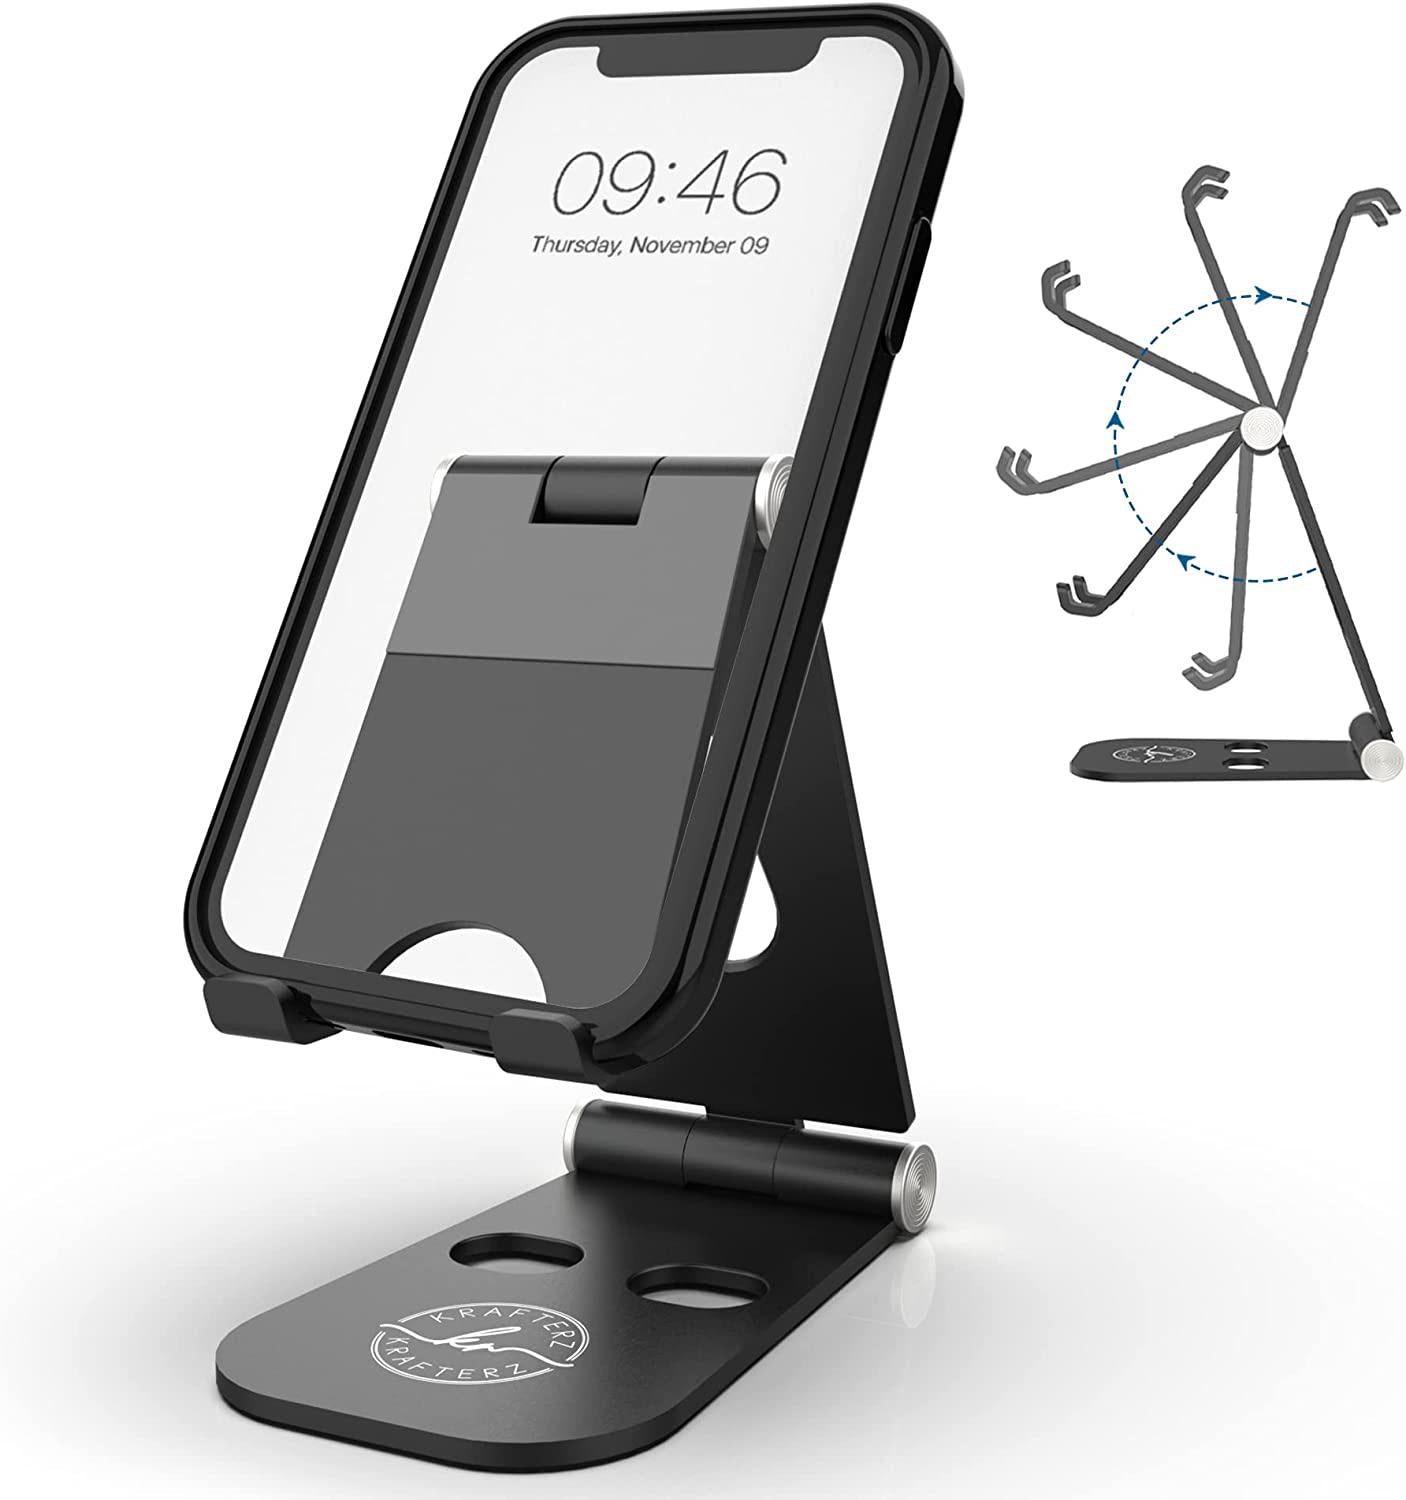 Krafterz, Krafterz Cell Phone Stand for Desk Aluminum Phone Holder Dock Cradle Compatible with All Smartphone, iPad Stand Adjustable, iPhone 11 12 pro XS Plus 8 7 6 Silver (Black)